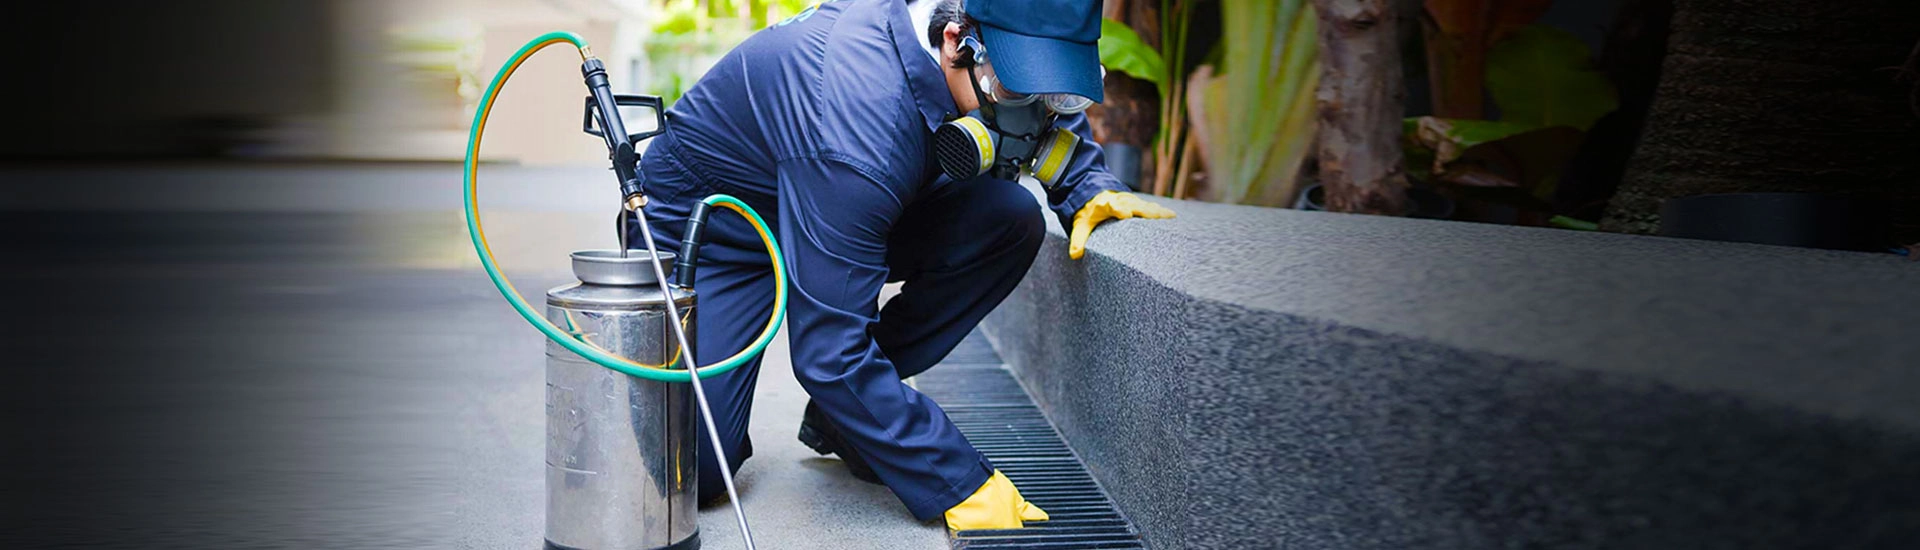 worker checking the drain after using pest control software